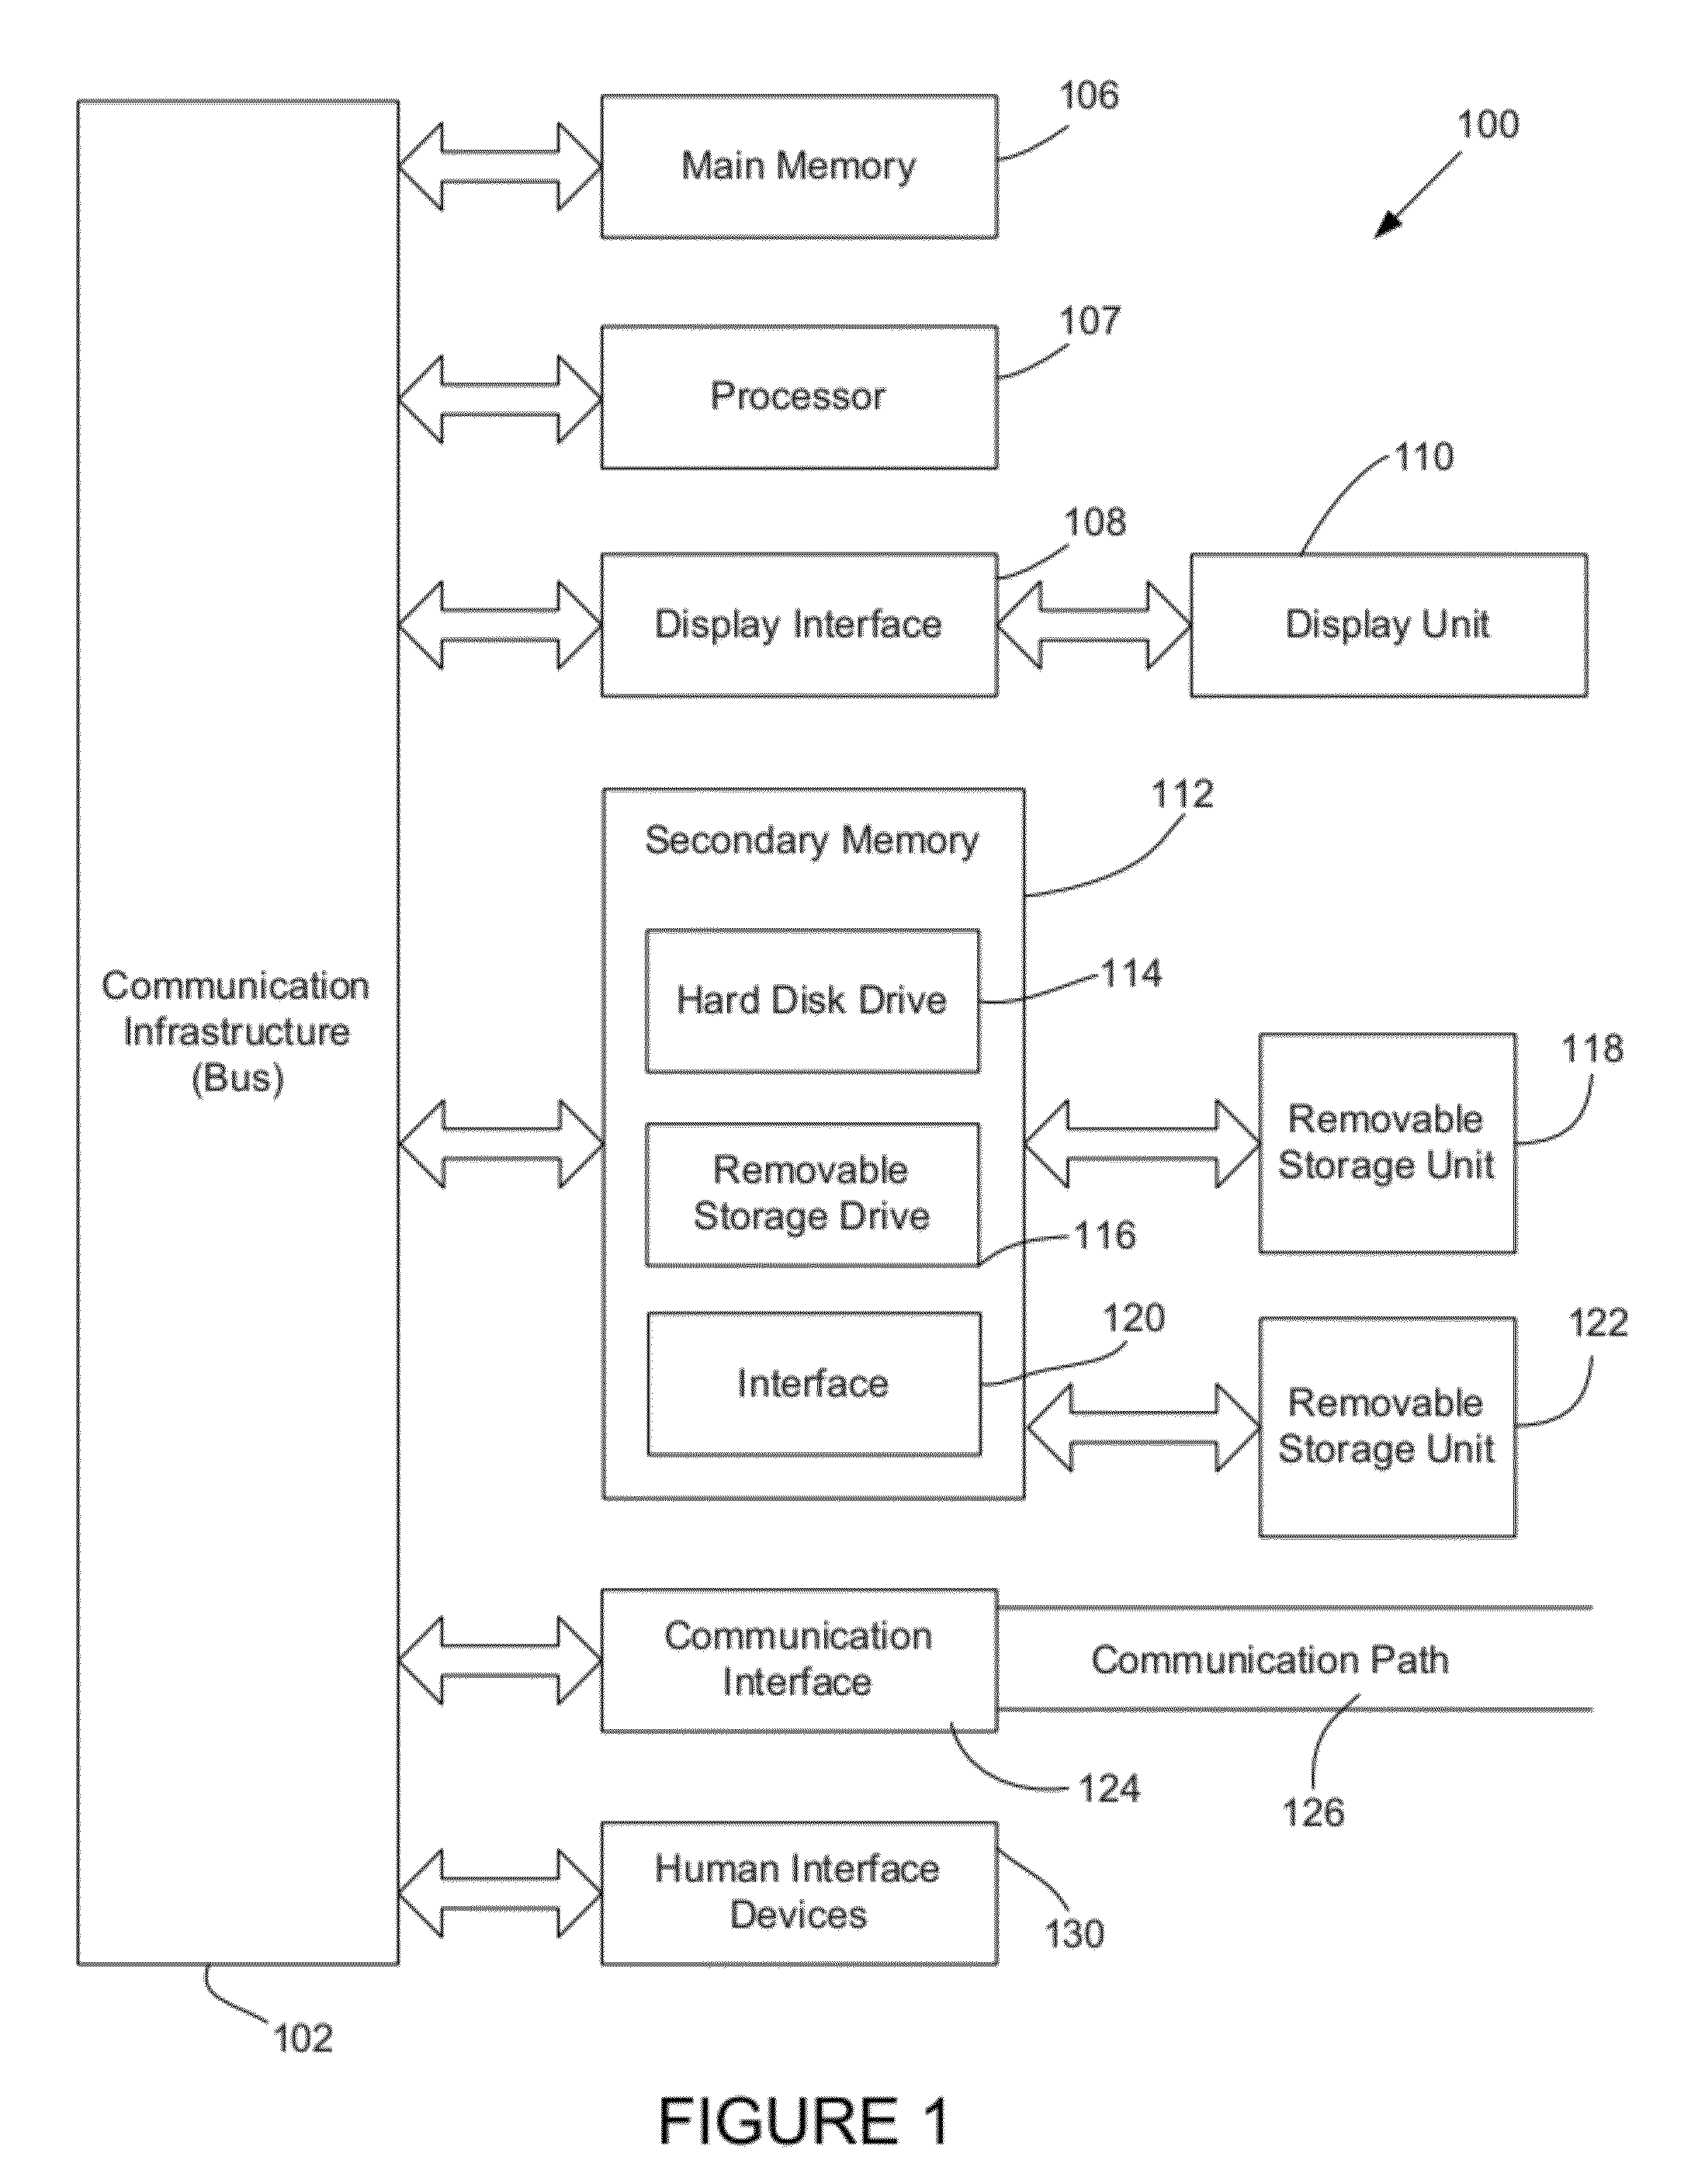 Systems and methods for allocating a common resource based on individual user preferences